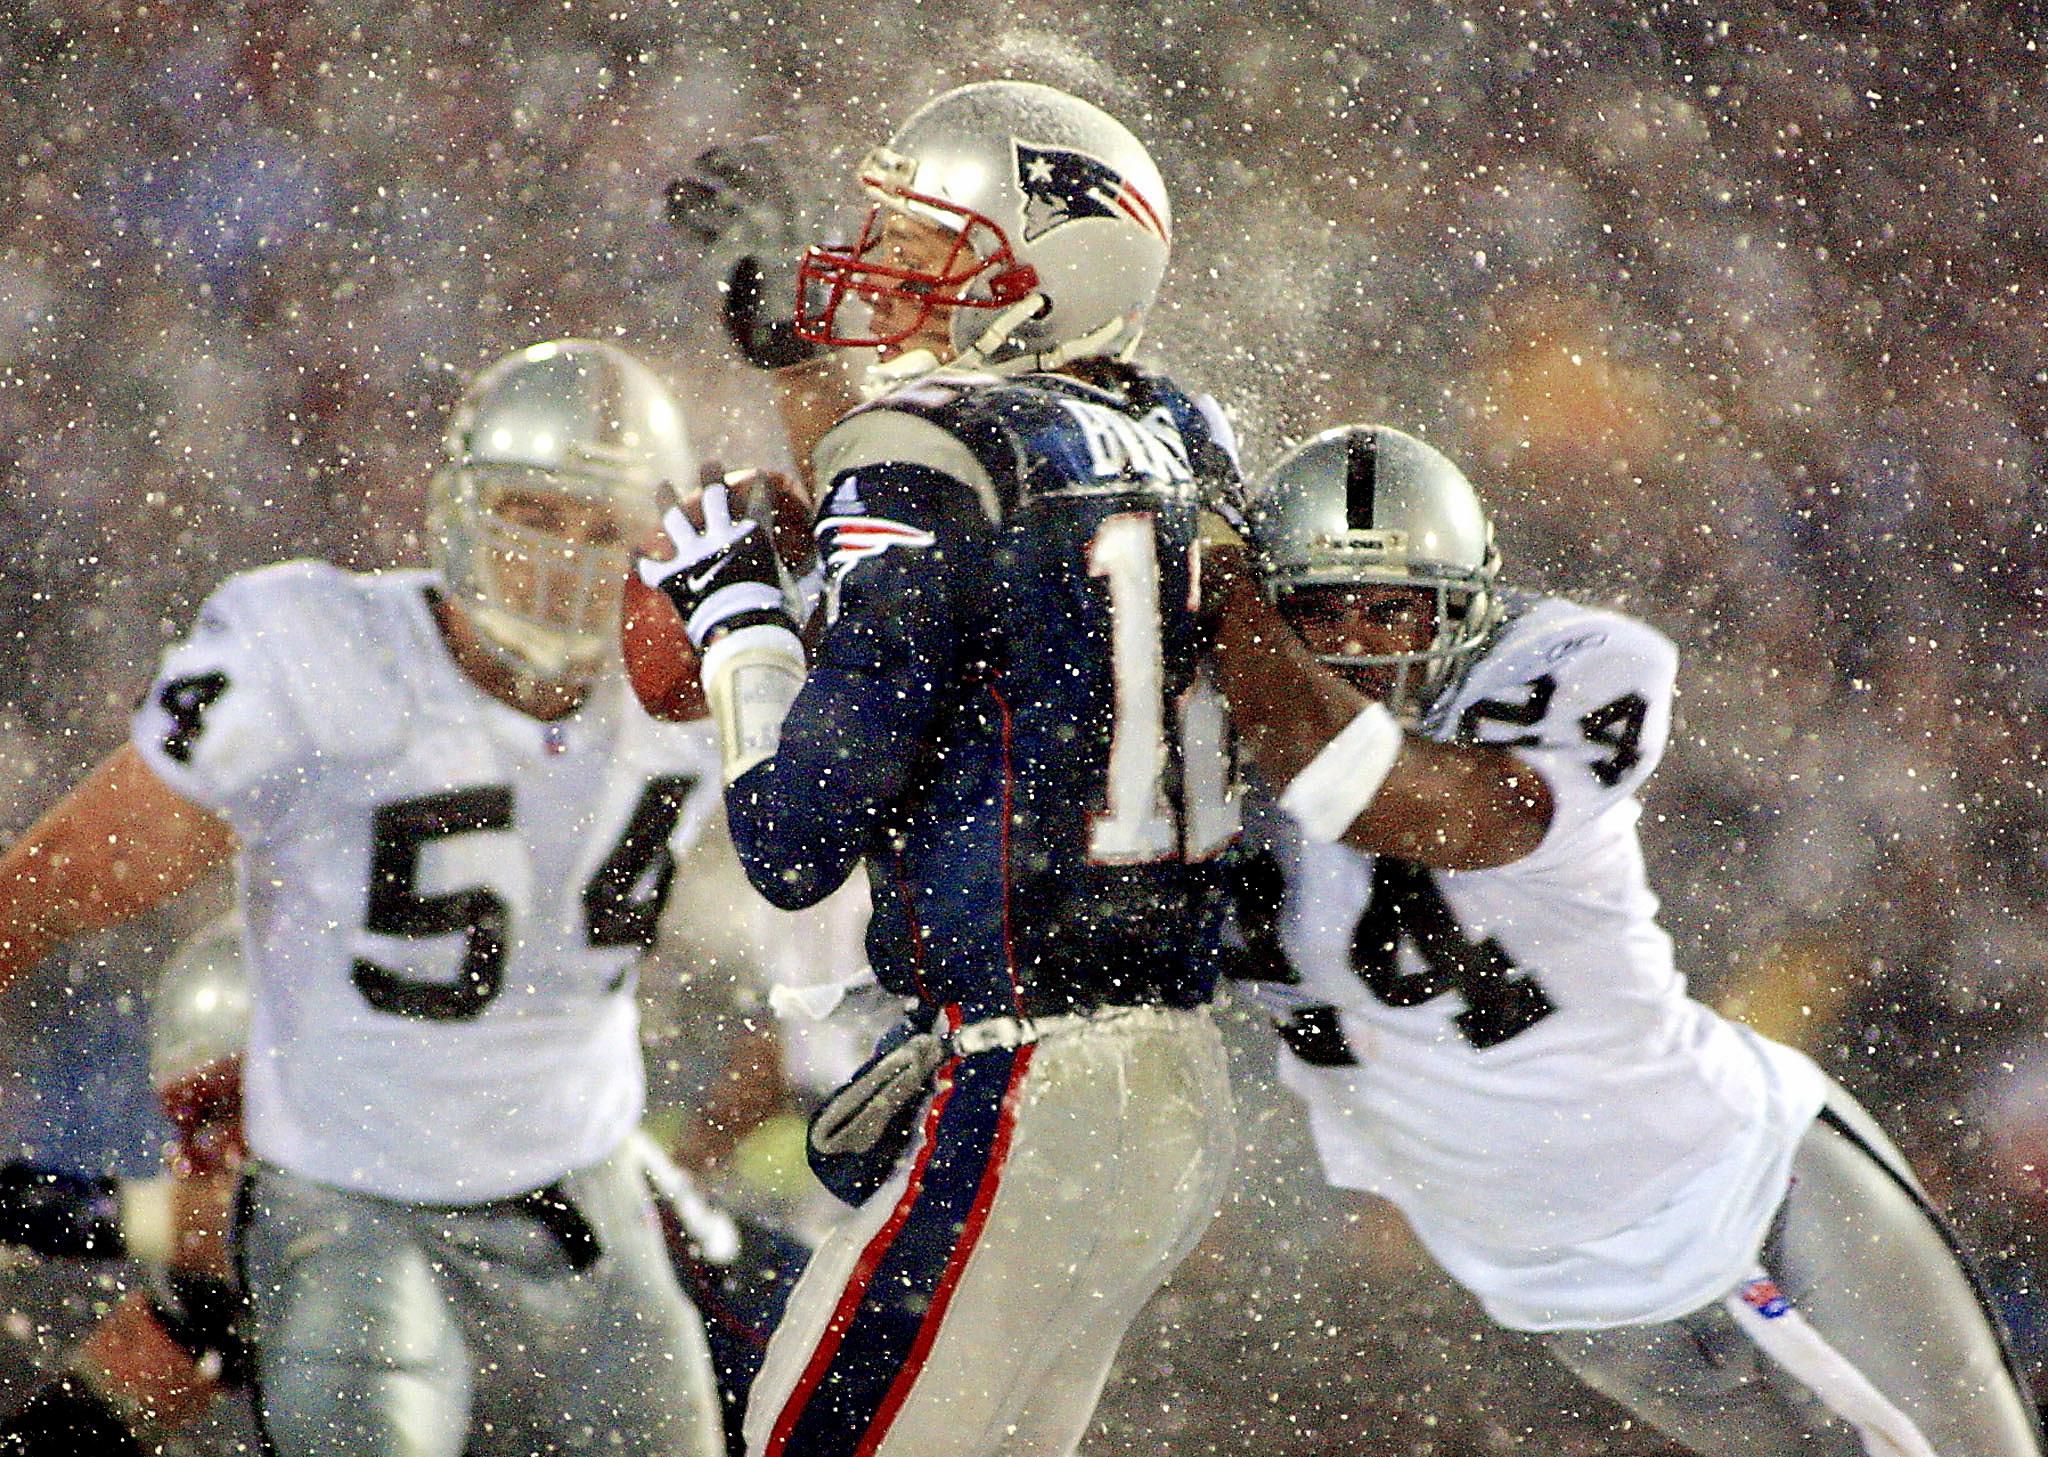 2001 Flashback: Snow Bowl remains an all-time Patriots classic